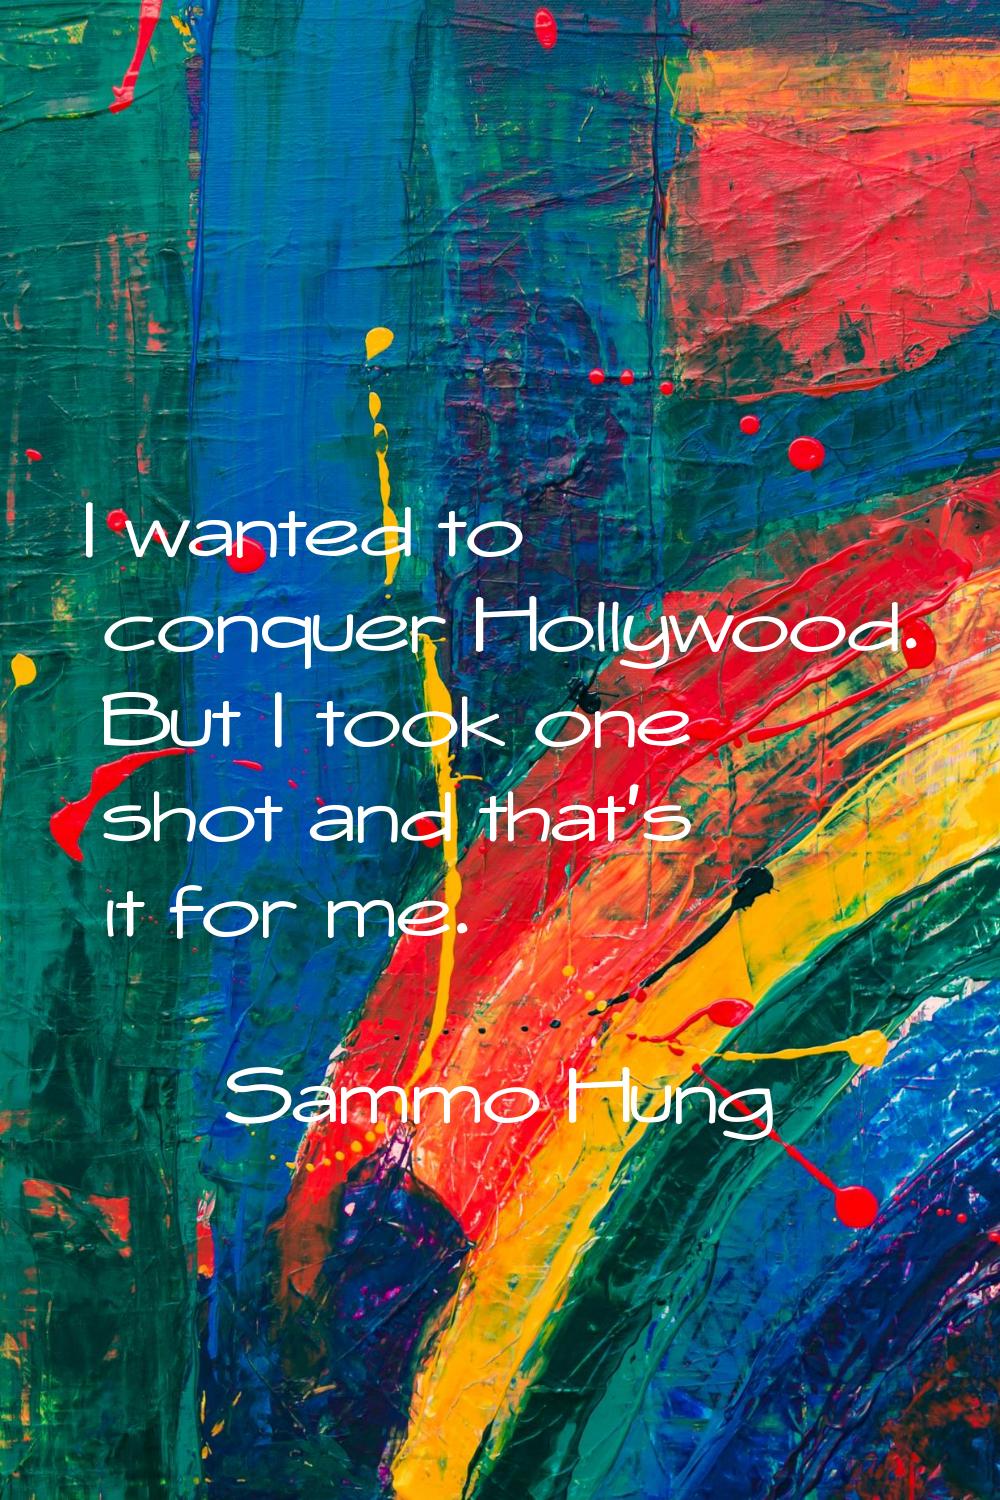 I wanted to conquer Hollywood. But I took one shot and that's it for me.